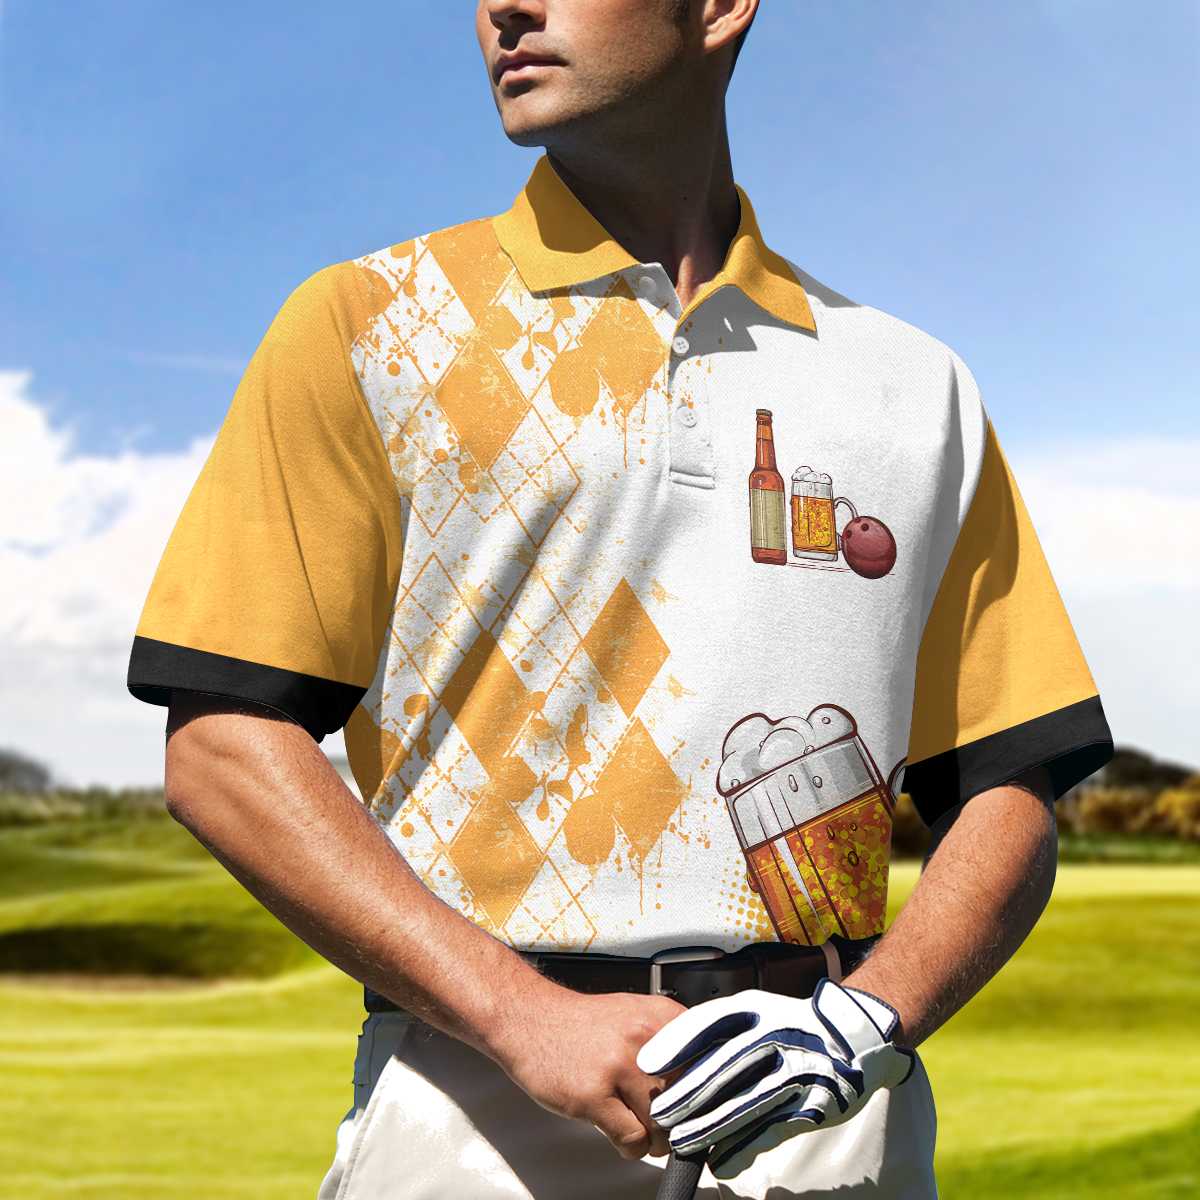 Bowling Solves My Most Problems Drinking Solves The Rest Polo Shirt/ Argyle Pattern Beer Polo Shirt/ Bowling Shirt For Men Coolspod